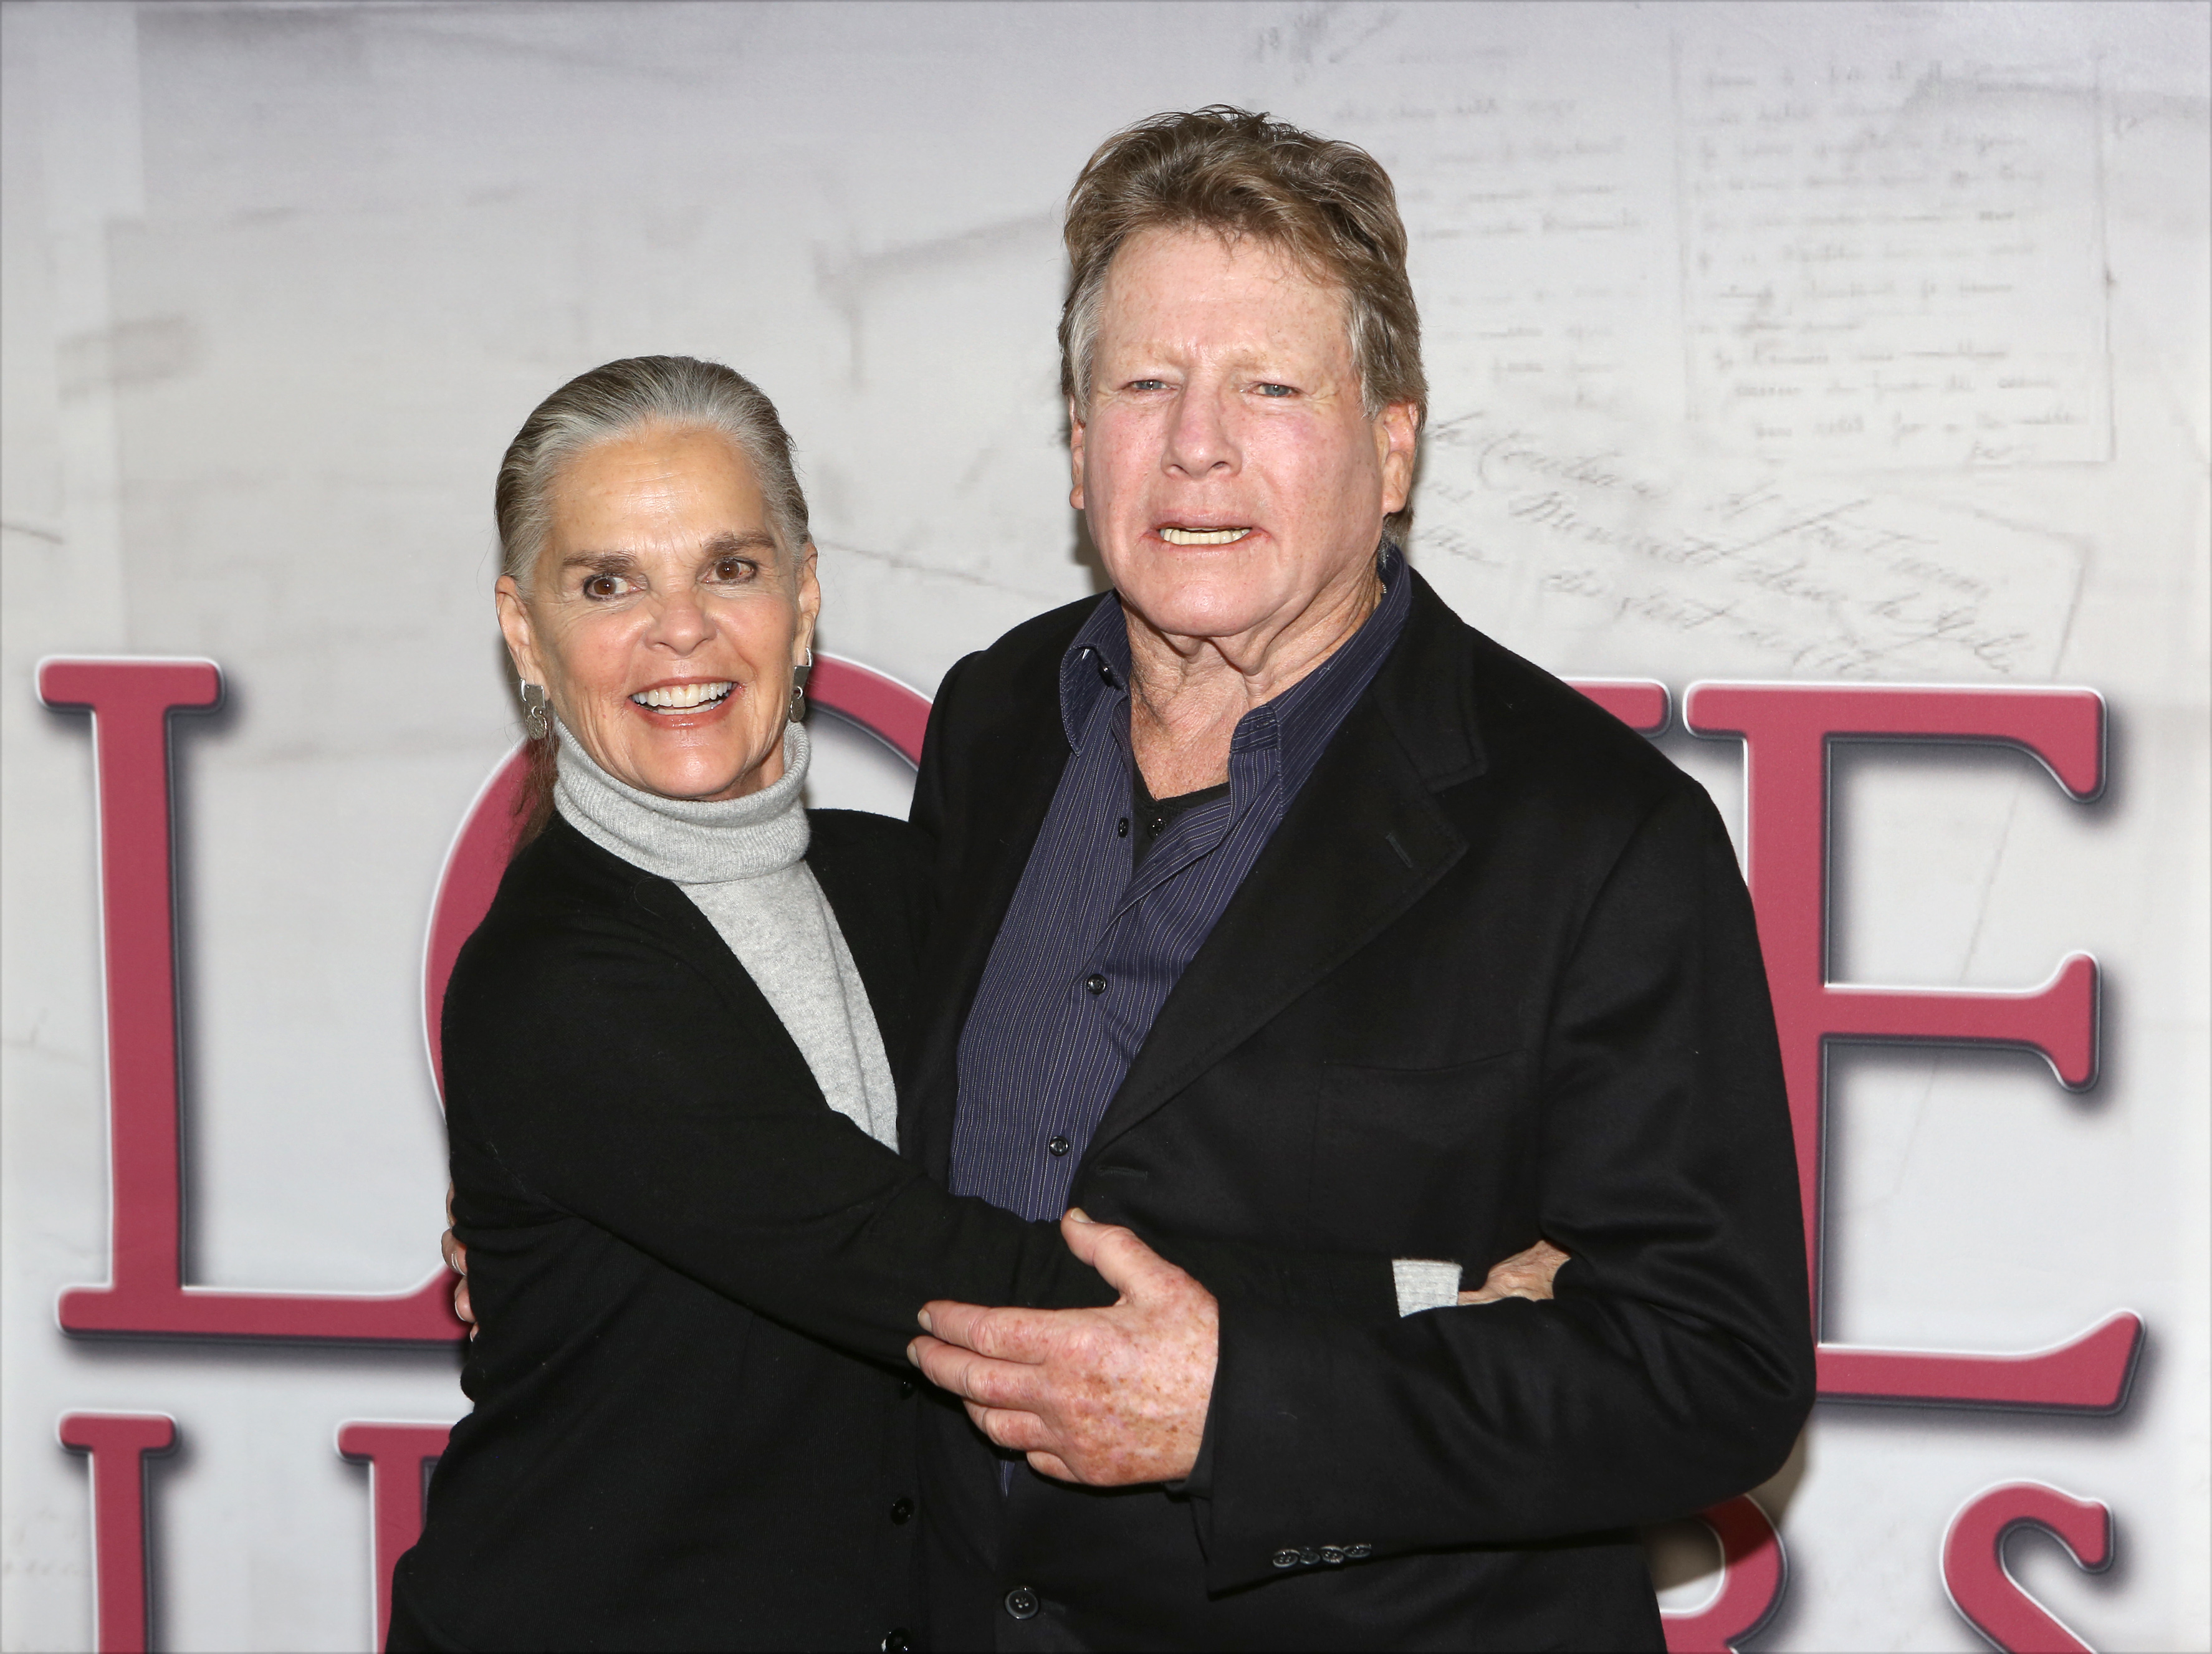 Ali MacGraw and Ryan O'Neal at a photo call for "Love Letters" at The Shelter Studios Penthouse on February 24, 2015, in New York City | Source: Getty Images